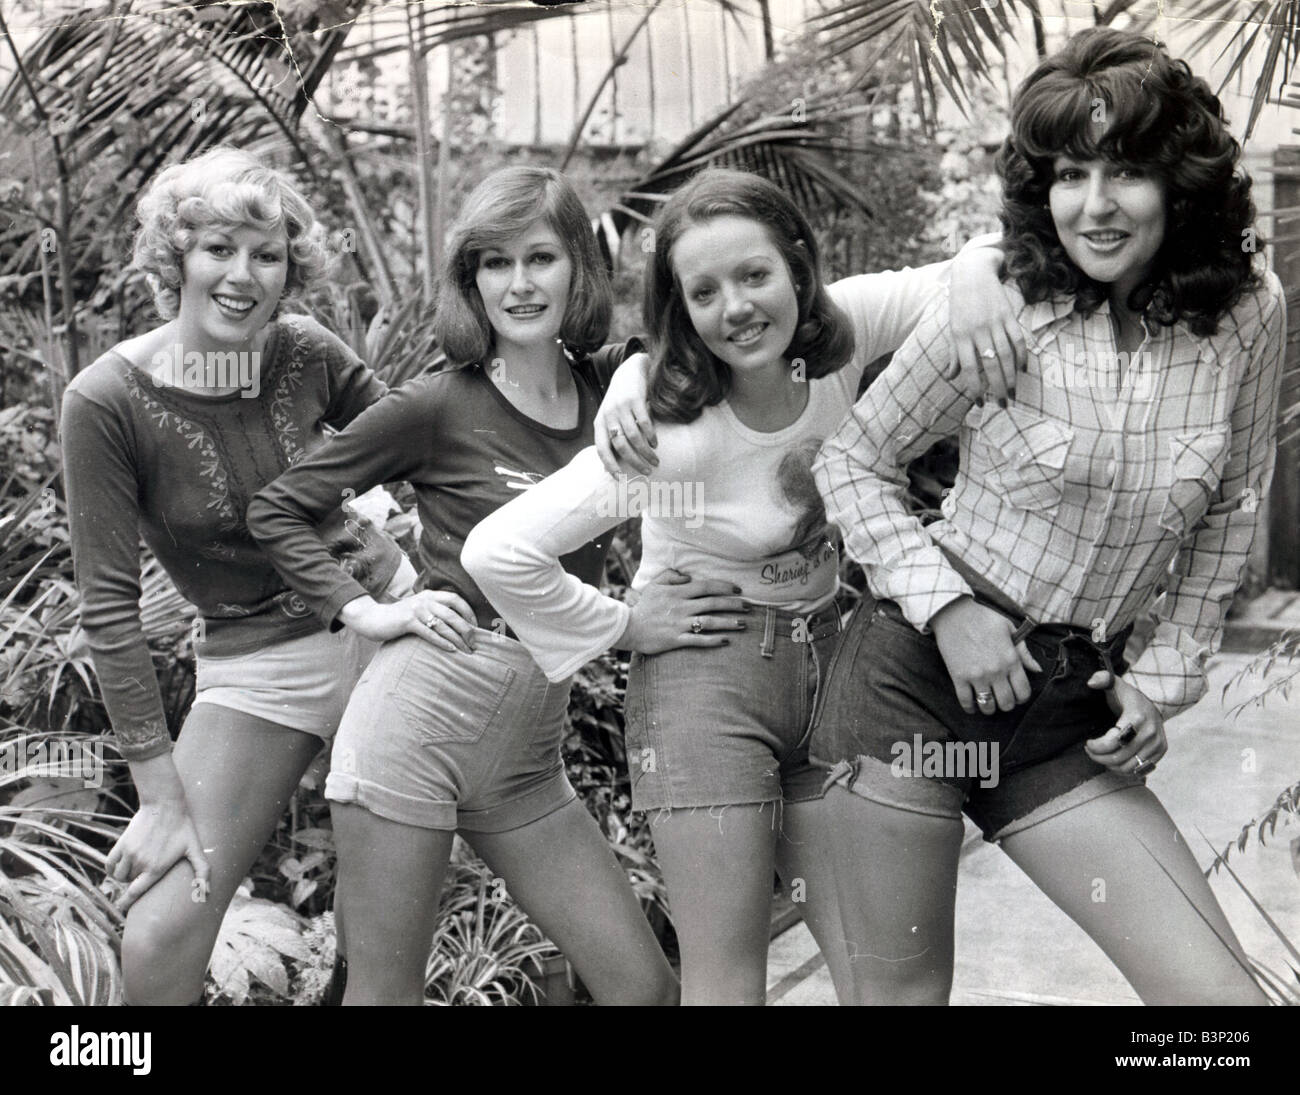 The picture shows Pat Jordan on the right and models Judy Maureen and  Sinead wearing hotpants standing with their hand on their Stock Photo -  Alamy